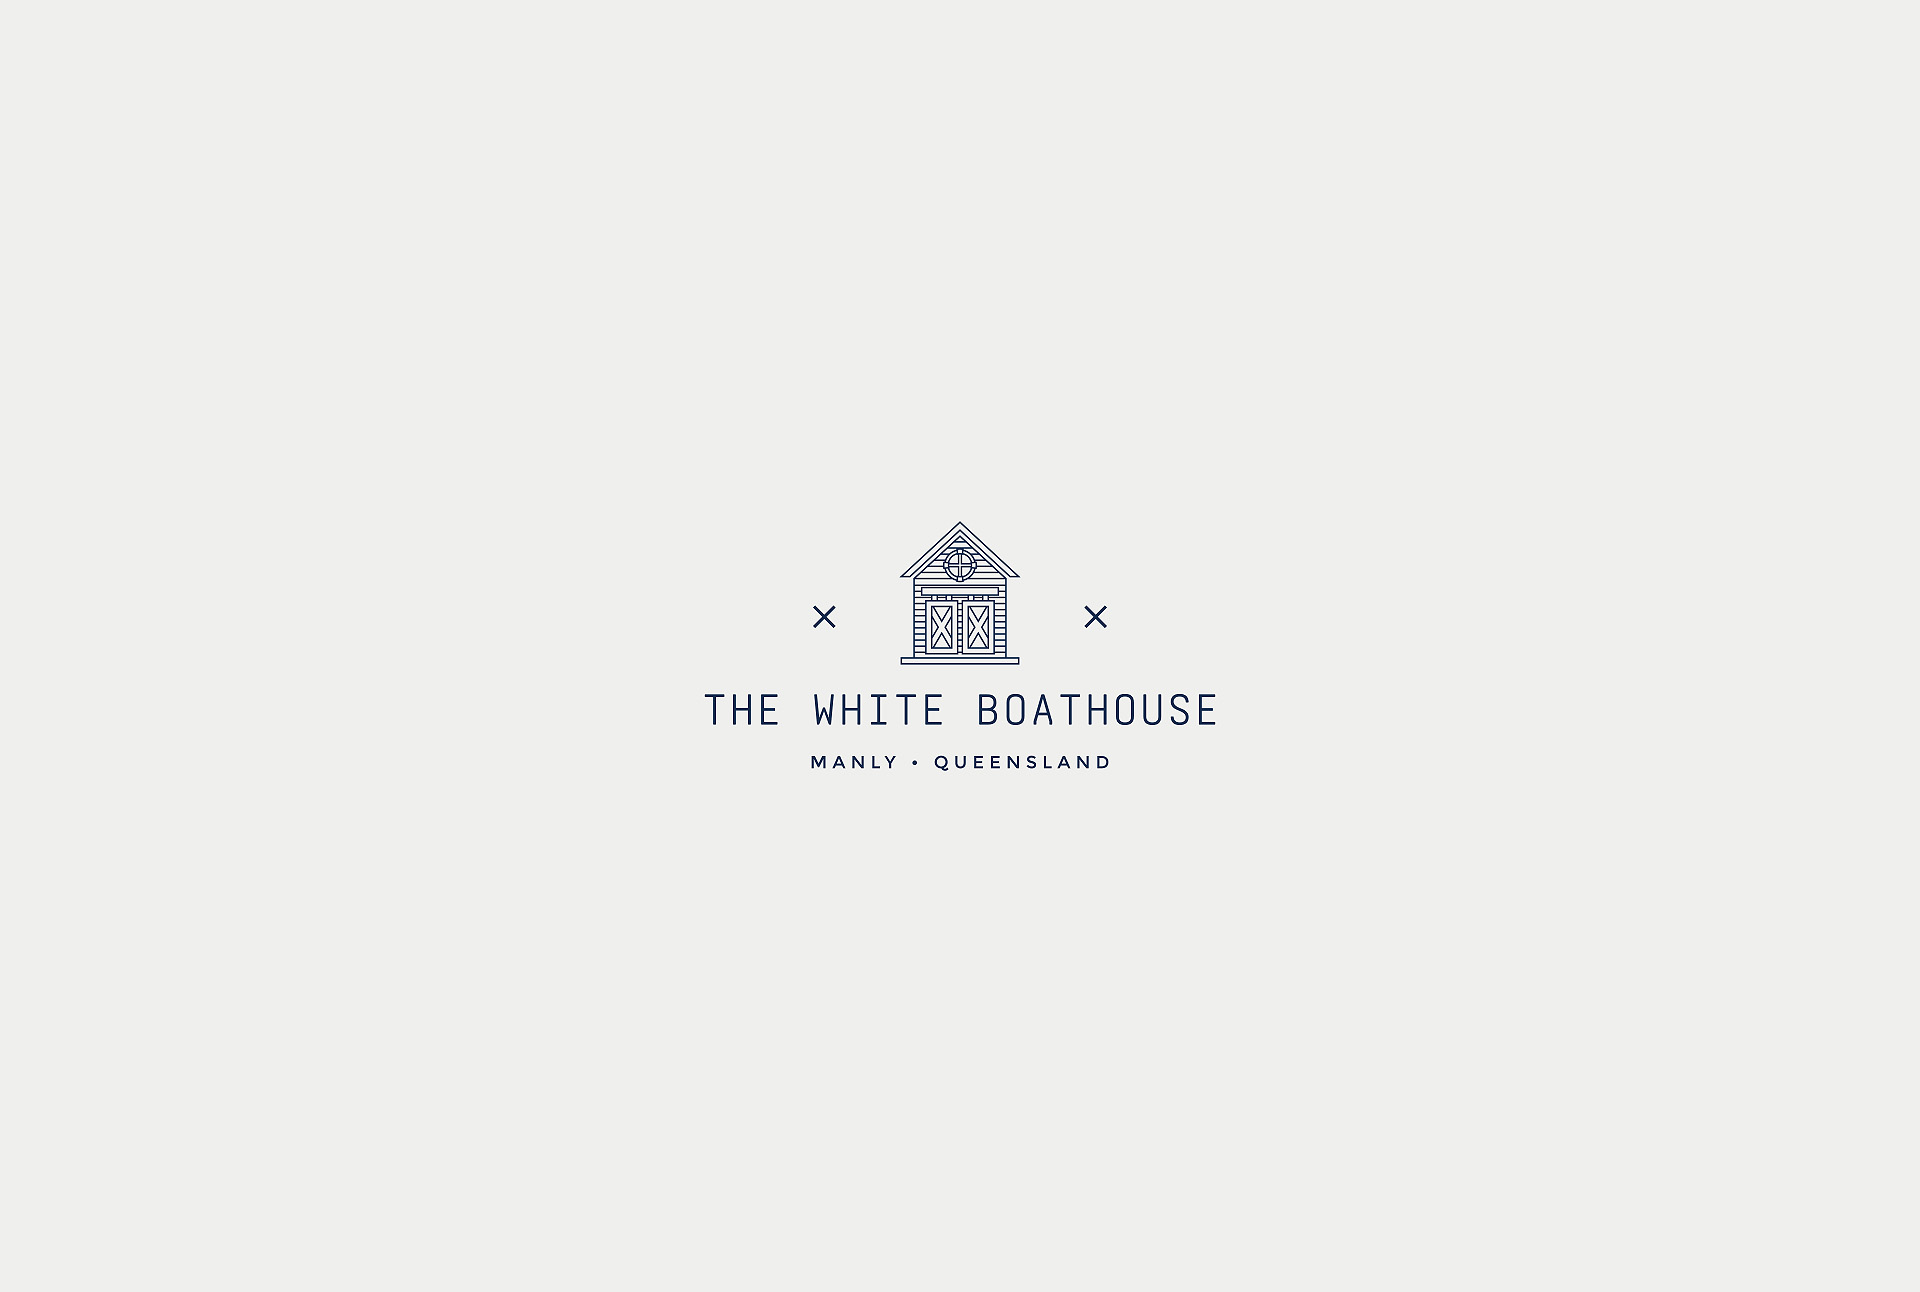 Logo Design, Branding and Packaging Design for The White Boathouse